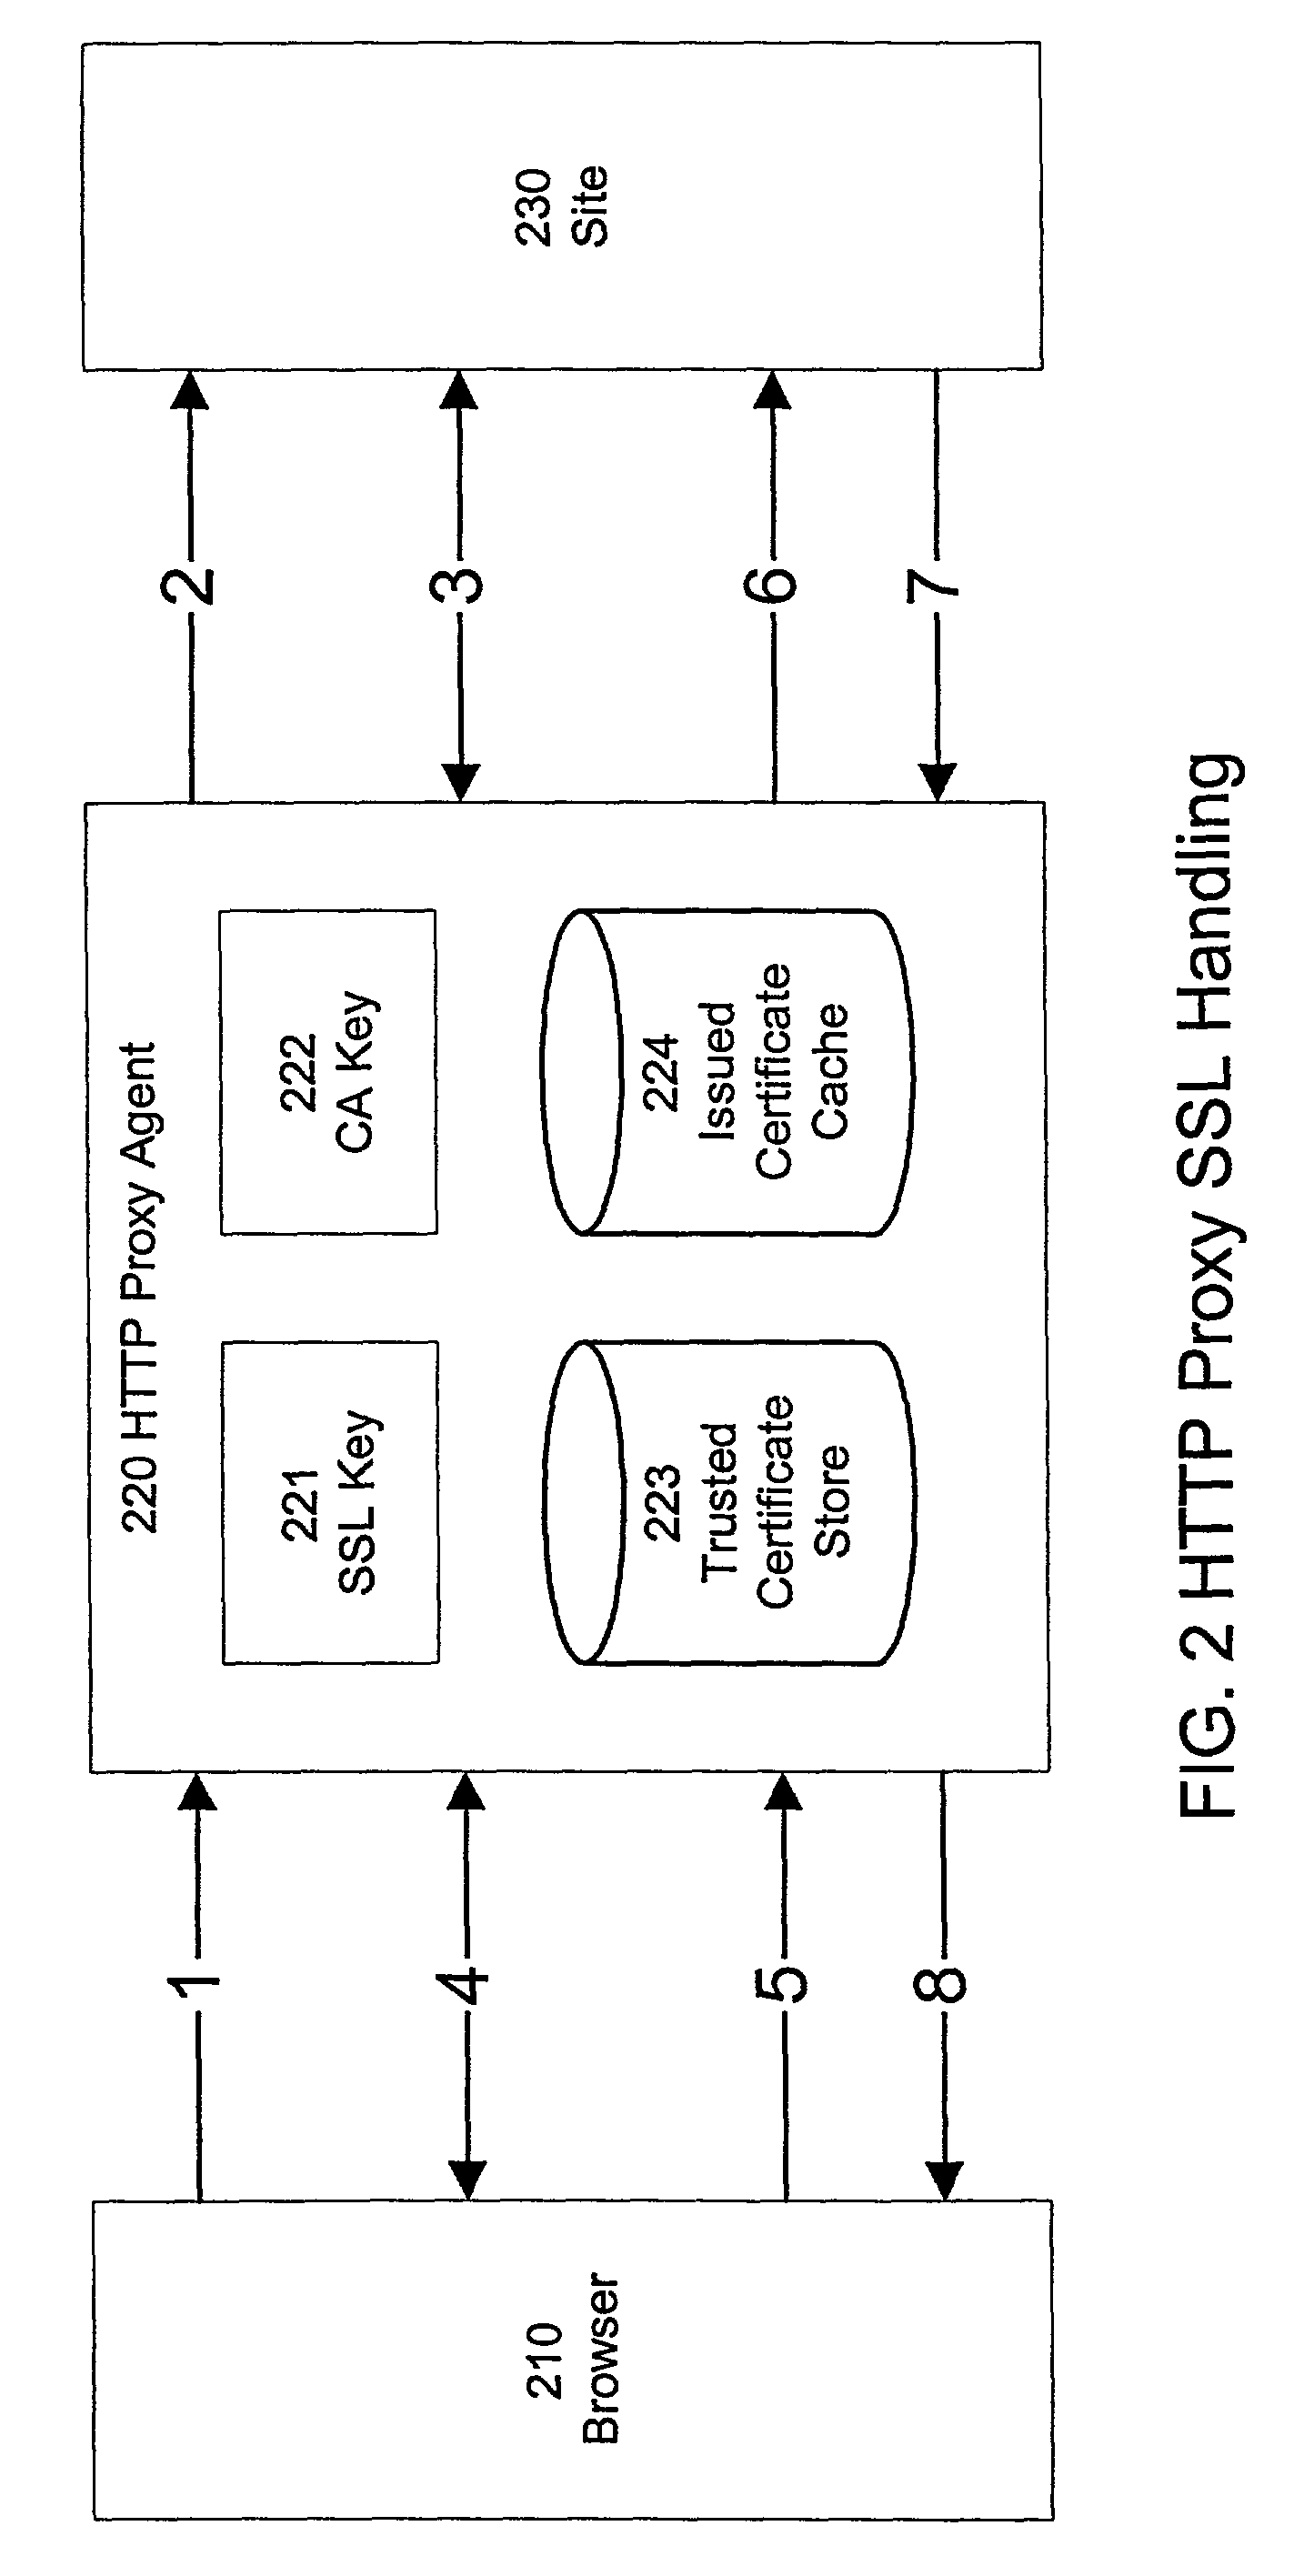 System and method for detecting and reporting online activity using real-time content-based network monitoring